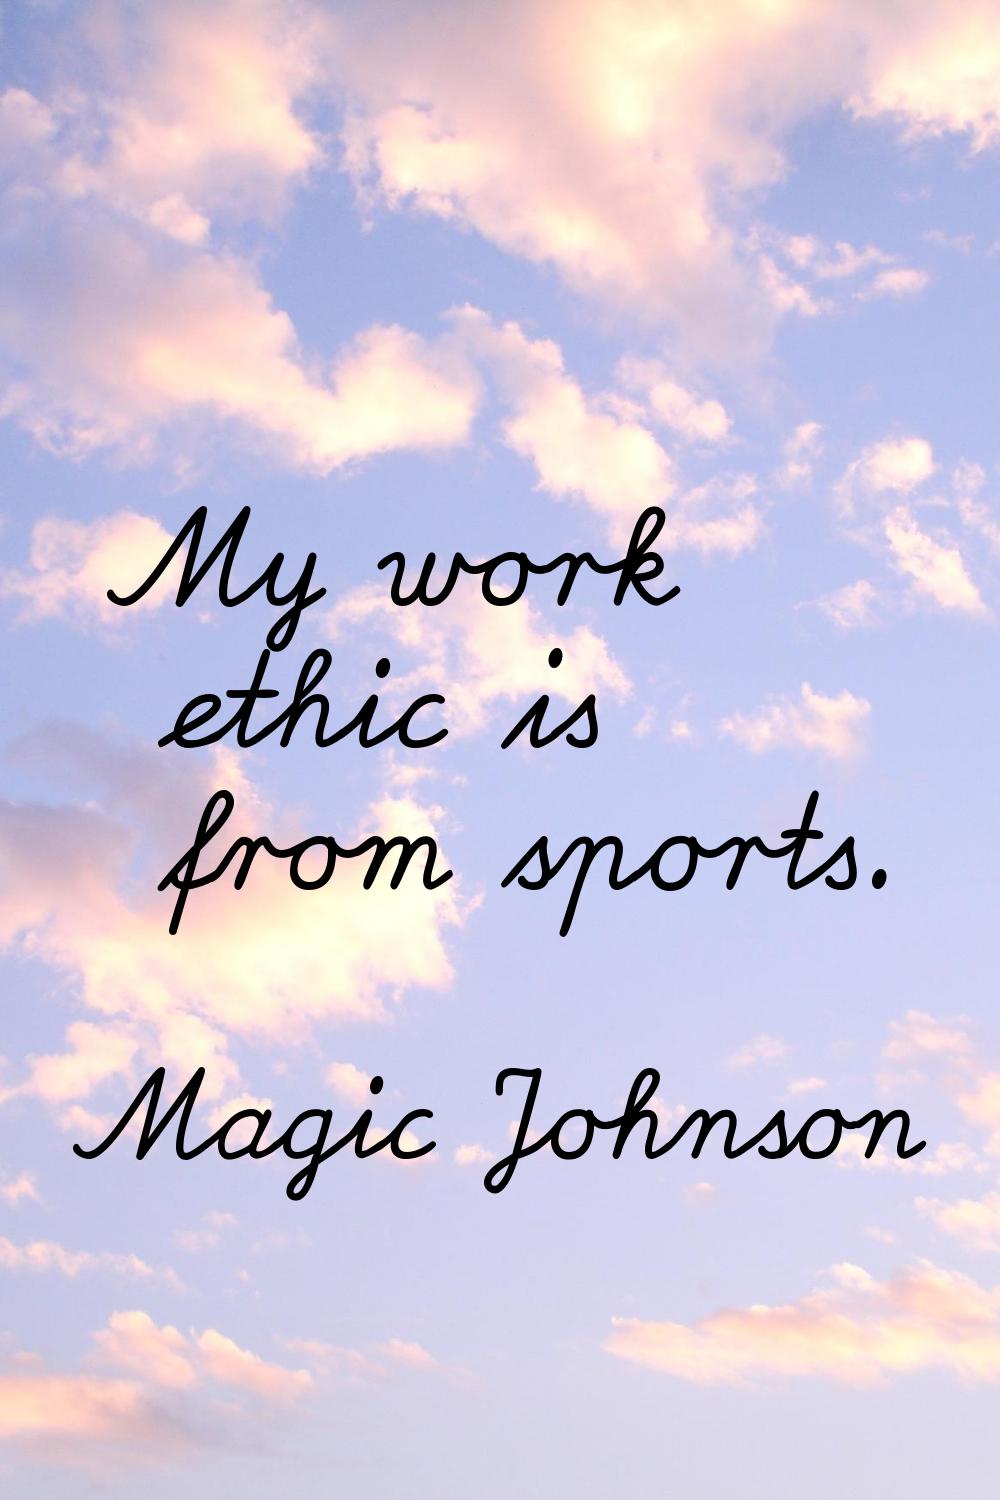 My work ethic is from sports.